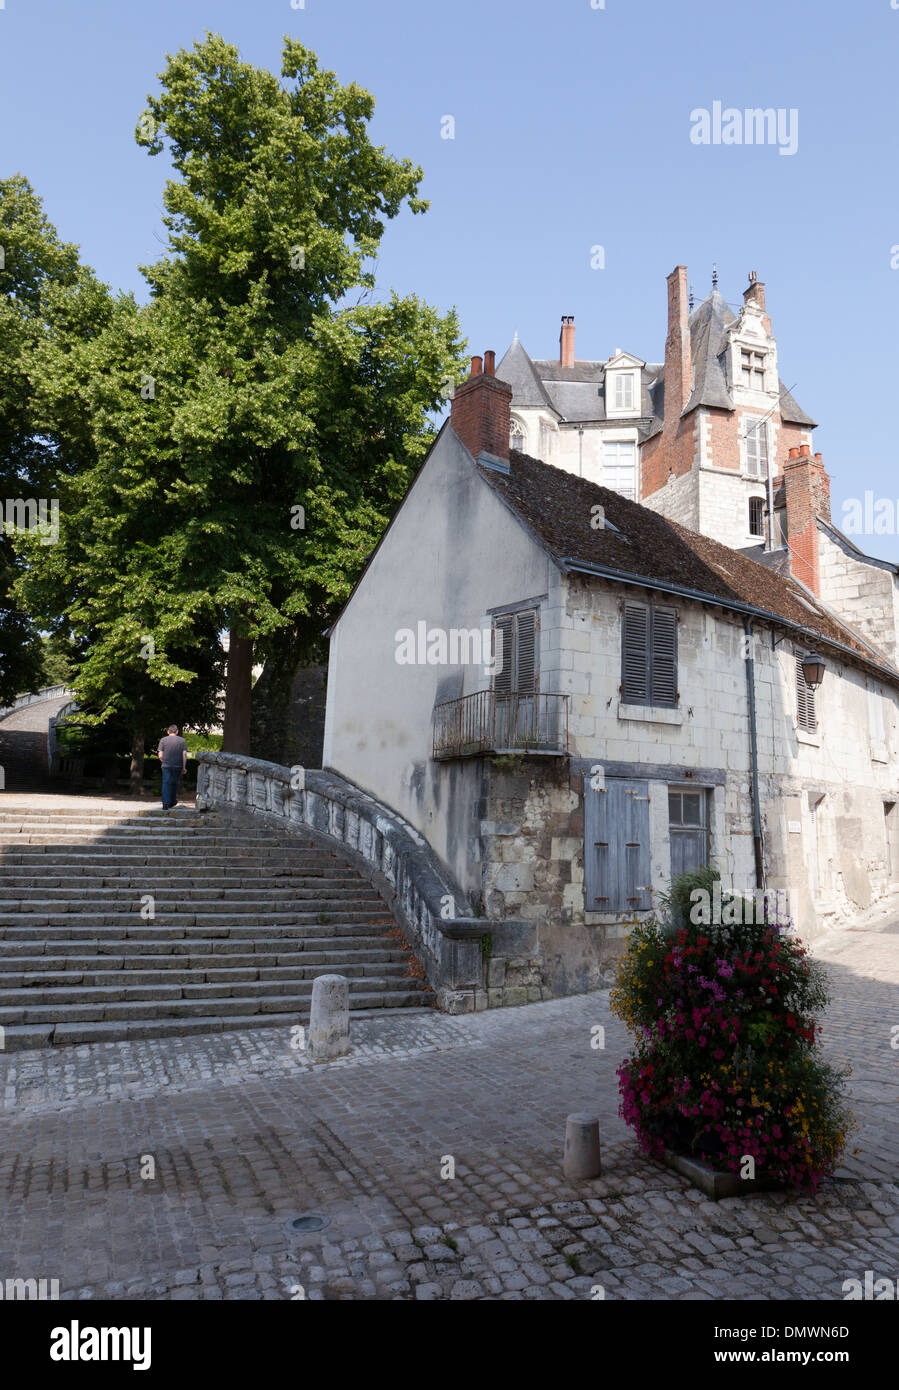 Chateau Saint-Aignan at the top of the town, view of the steps leading up to it Stock Photo